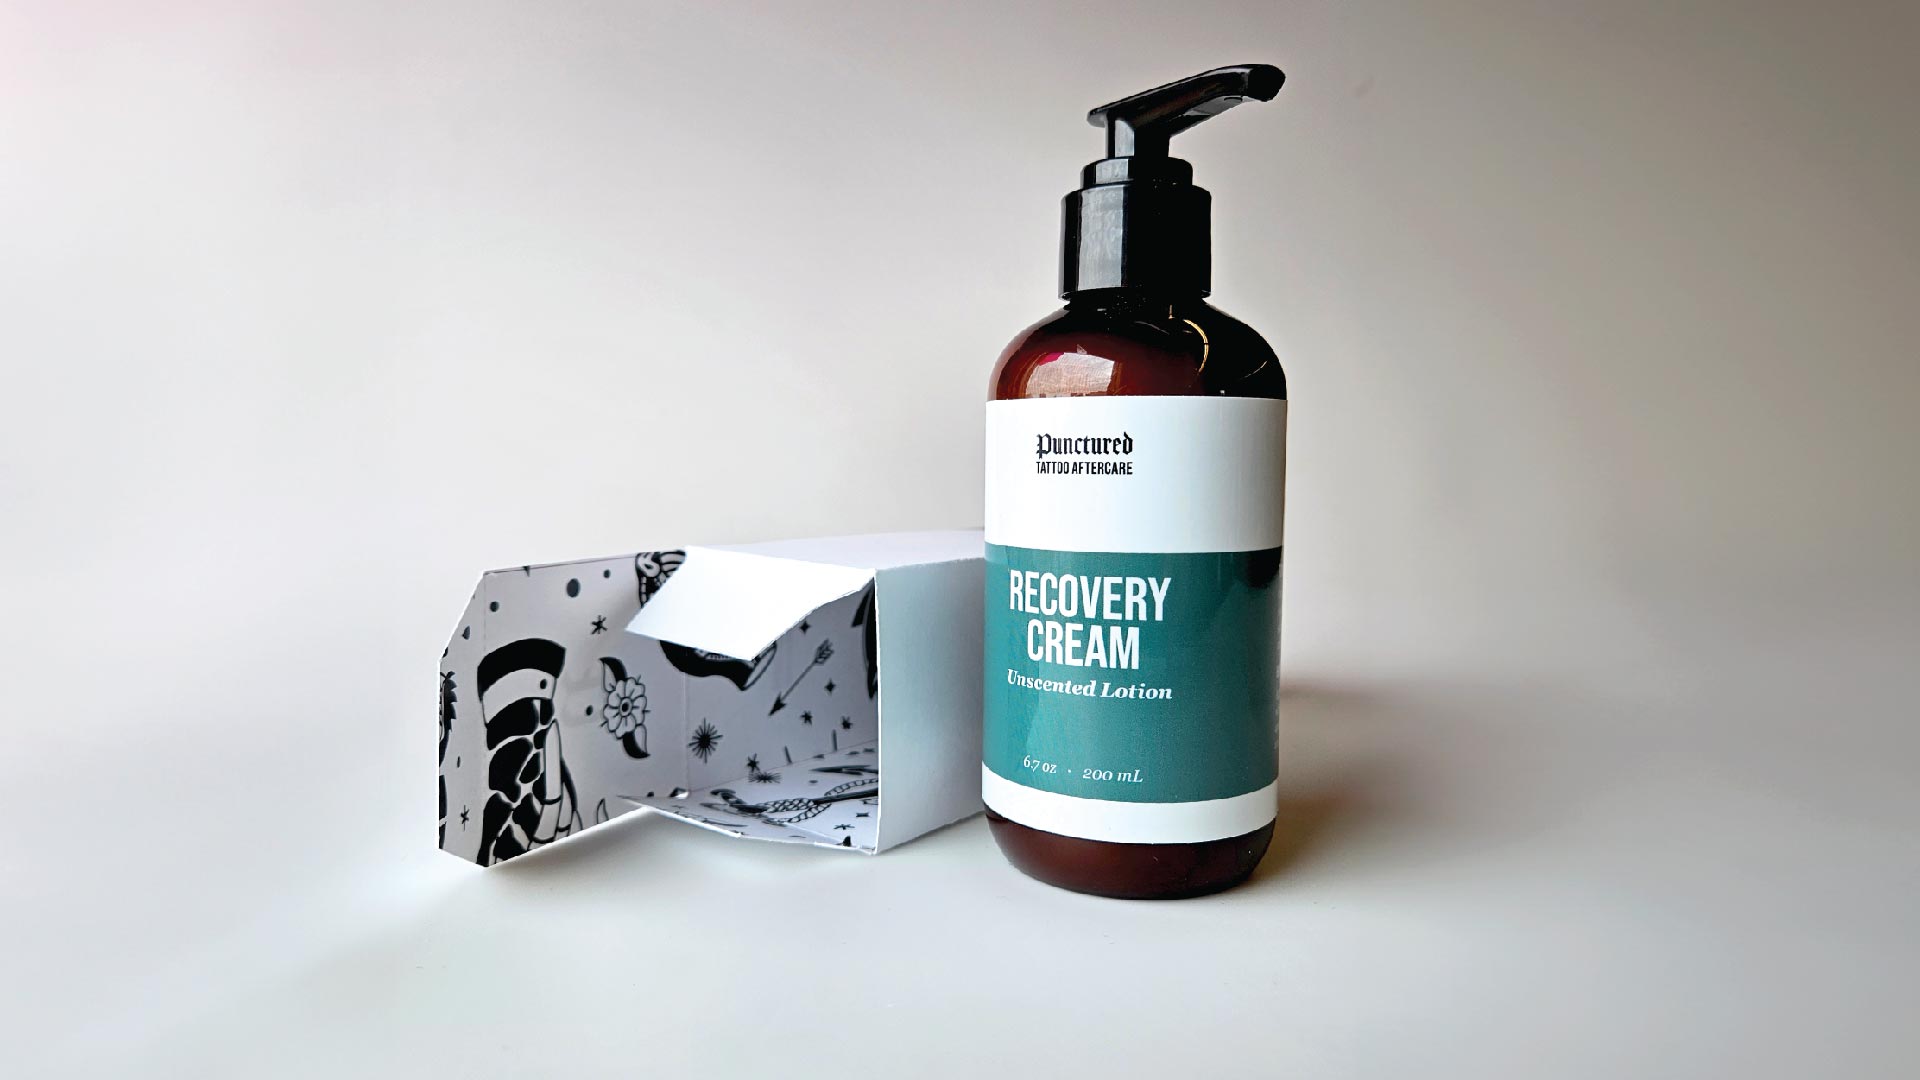 Recovery Cream (Lotion) bottle and package